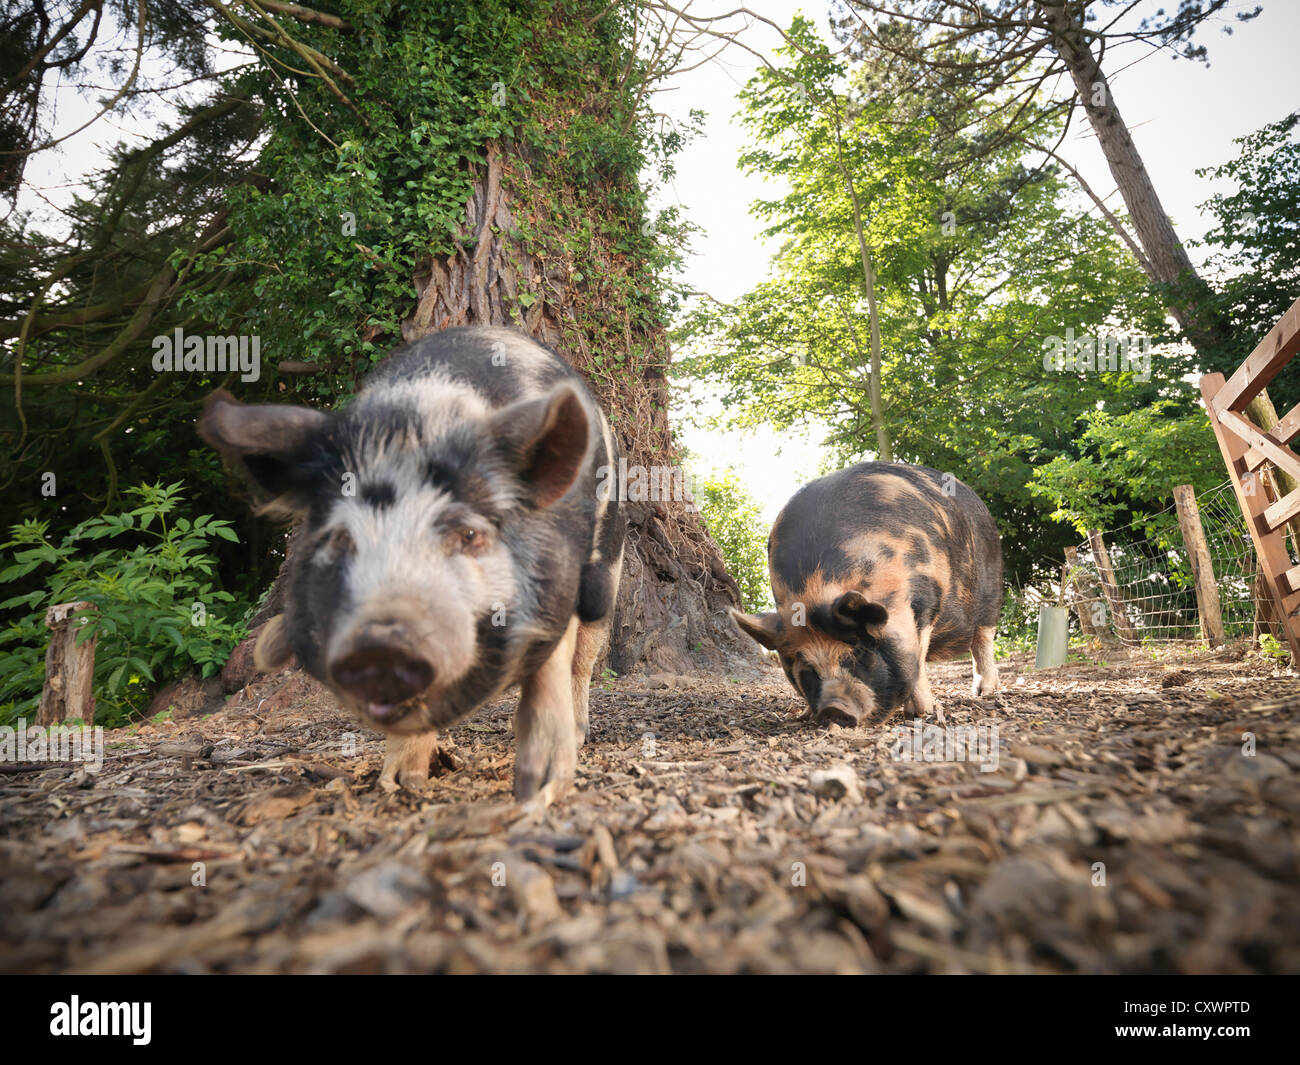 Pigs rooting on dirt ground Stock Photo